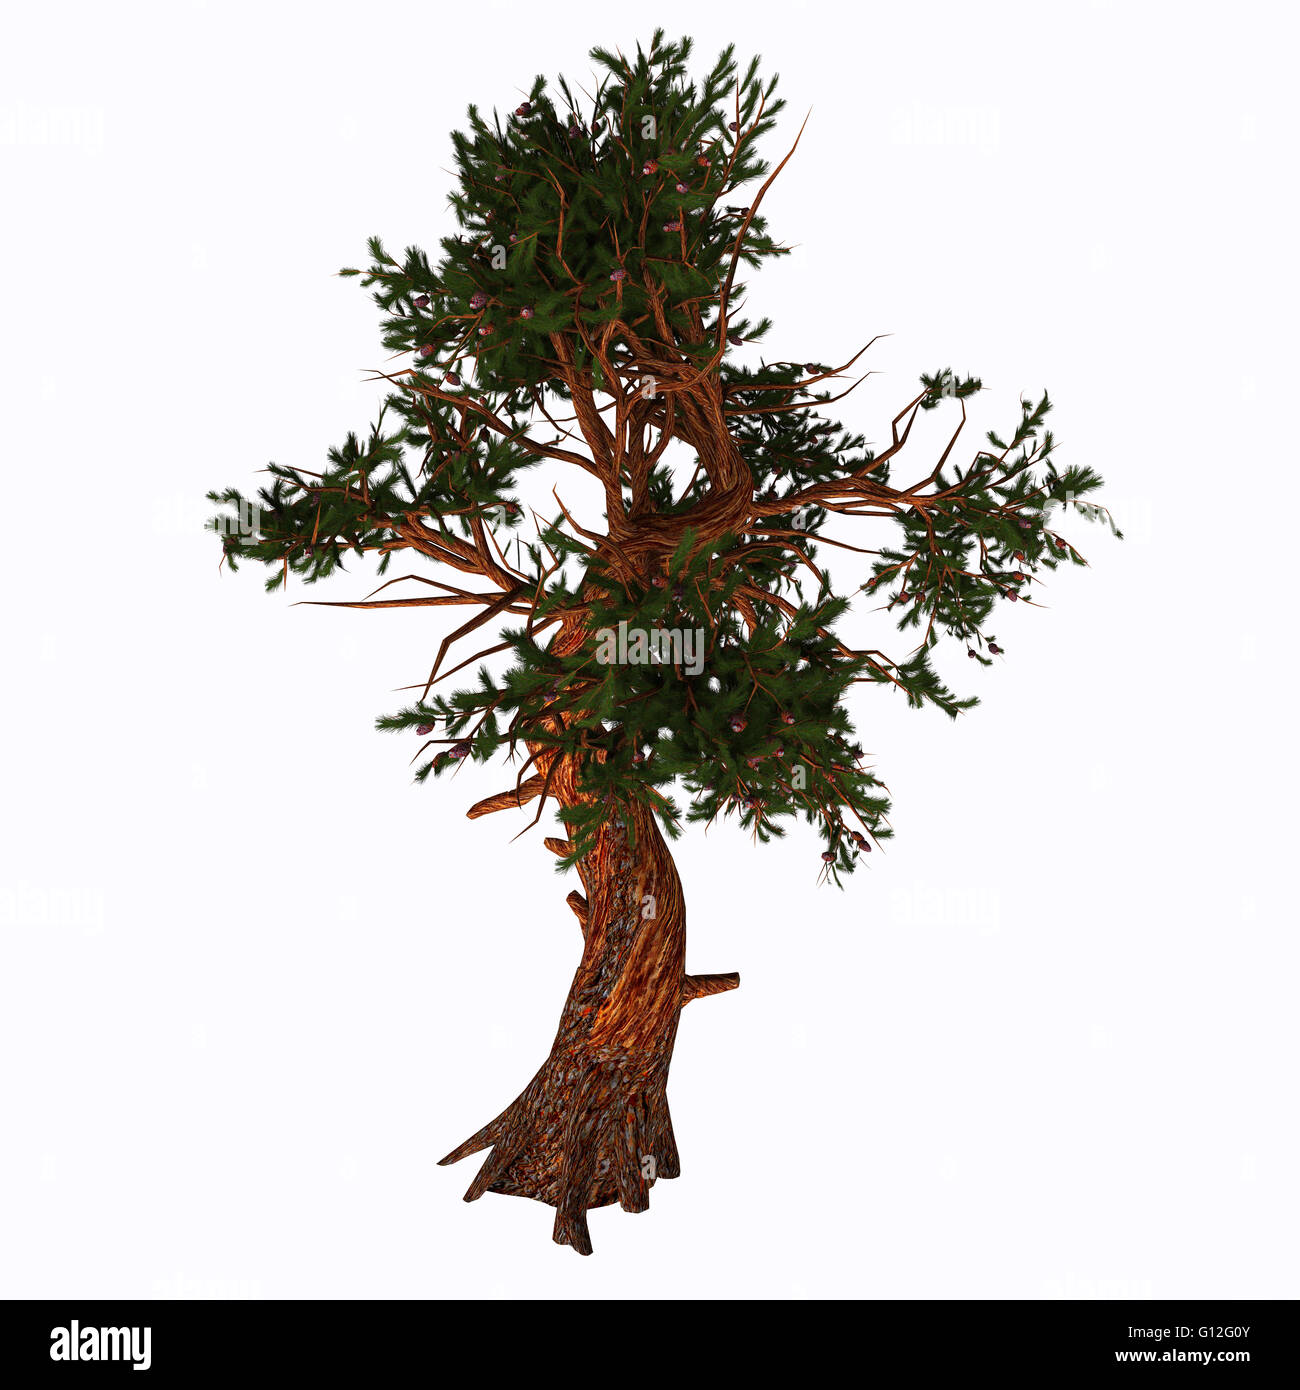 Pinus aristata, the Rocky Mountain bristlecone pine, is a species of pine native to the United States. Stock Photo